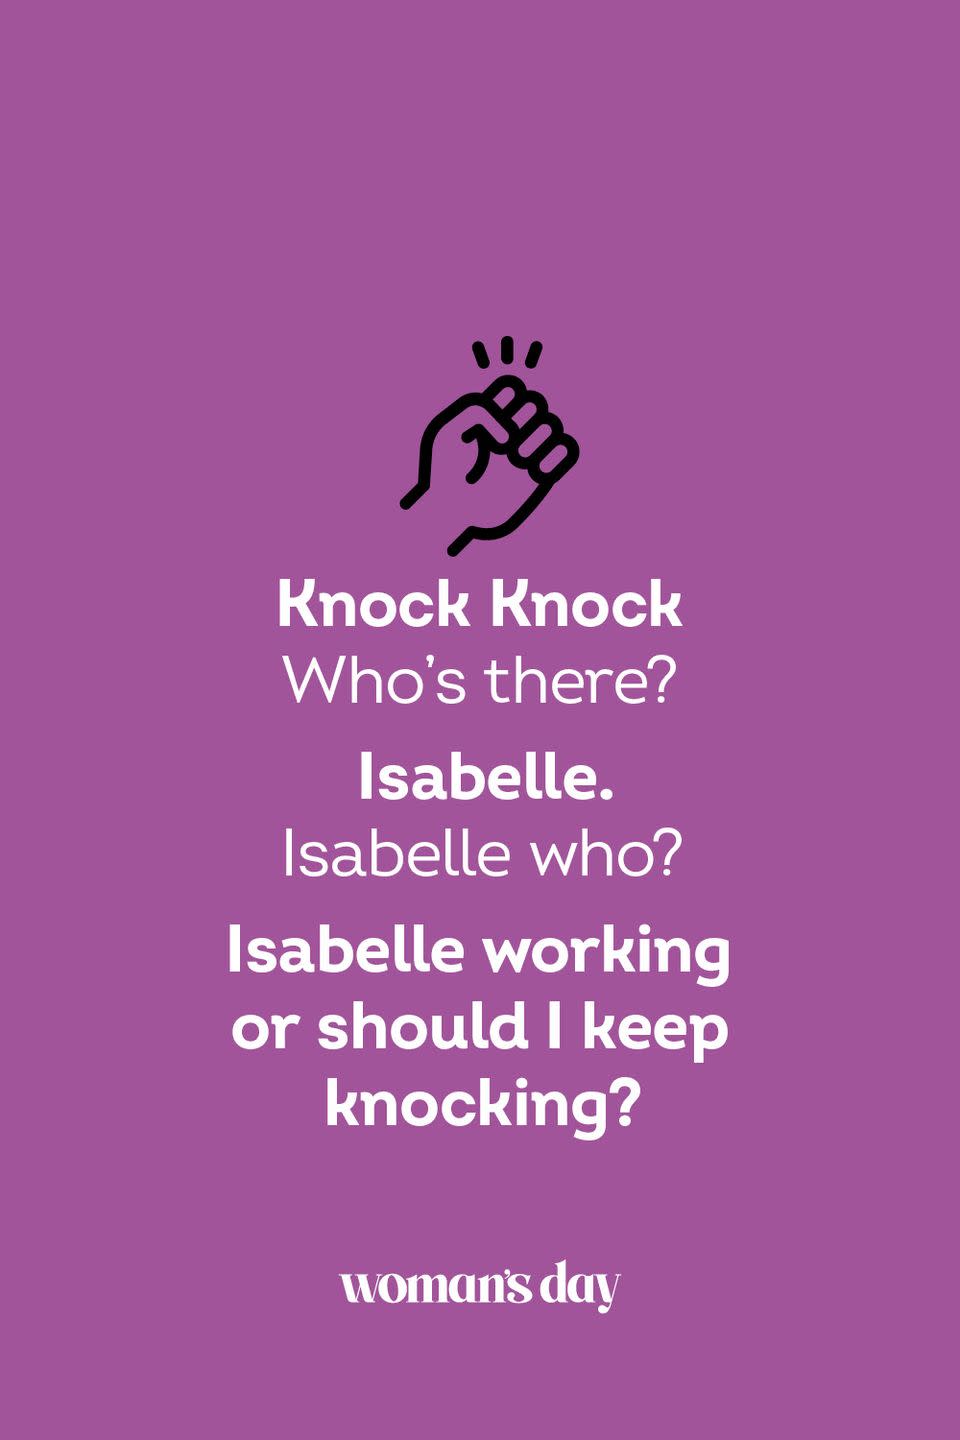 <p><strong>Knock Knock</strong></p><p><em>Who’s there? </em></p><p><strong>Isabelle.</strong></p><p><em>Isabelle who?</em></p><p><strong>Isabelle working or should I keep knocking?</strong></p>